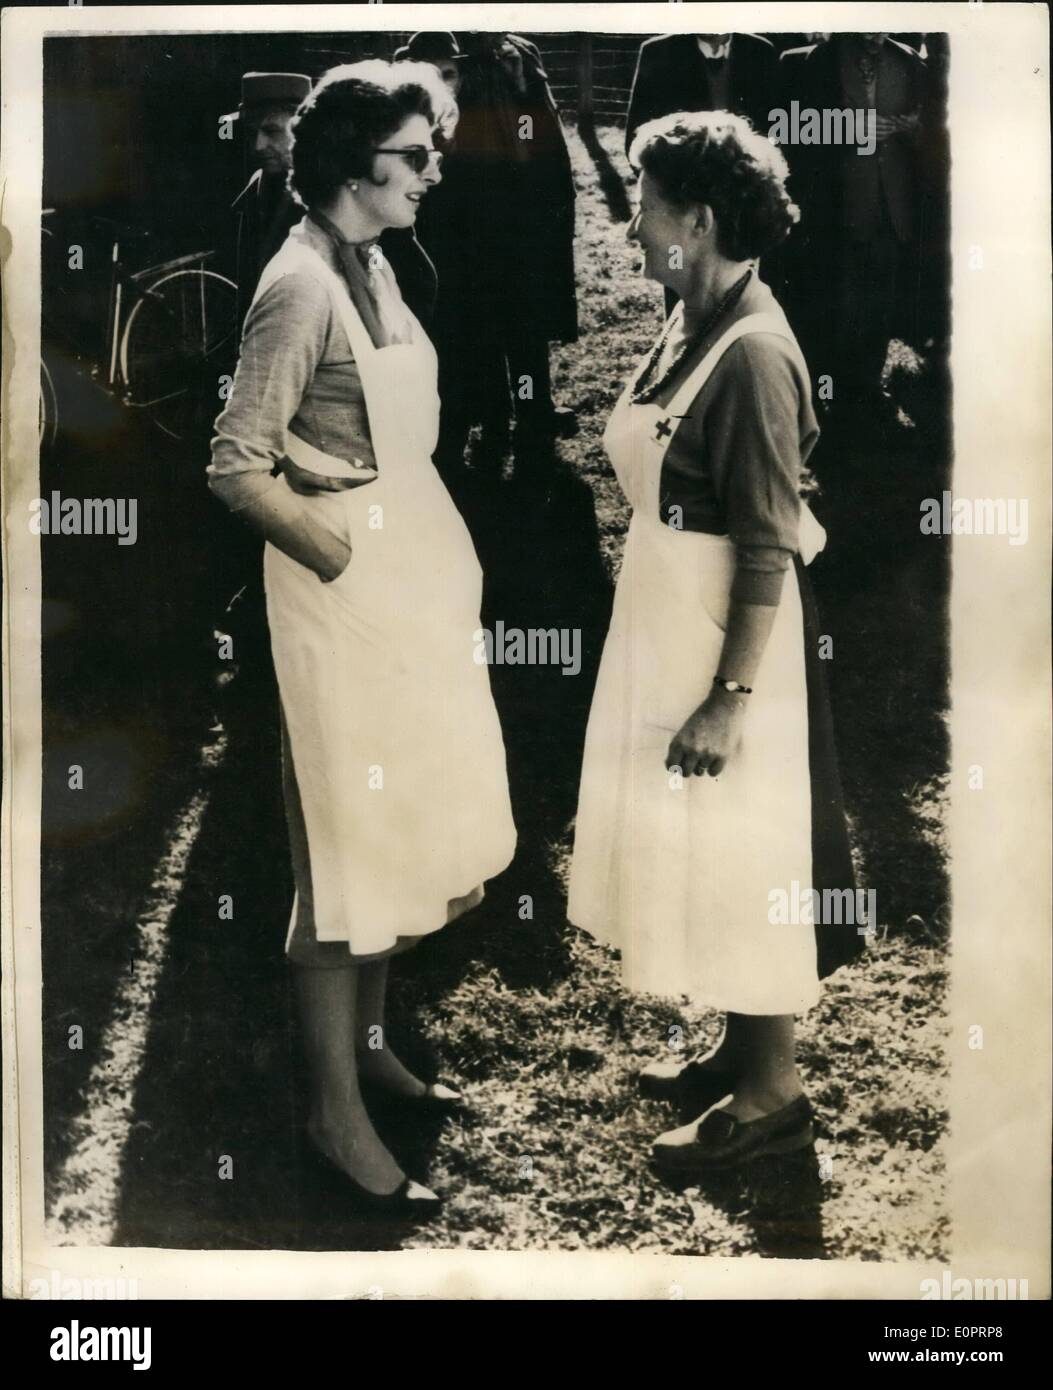 Nov. 11, 1956 - Hungarian Refugees Arrive In Switzerland: Some 200 Hungarian refugees, mainly whole families with children, arrived at the Swiss frontier on Thursday, where they are the guests of the Swiss Red Cross. Photo shows Princess Gina of Liechtenstein (left), was ready to help when the refugees arrived at the frontier. Stock Photo